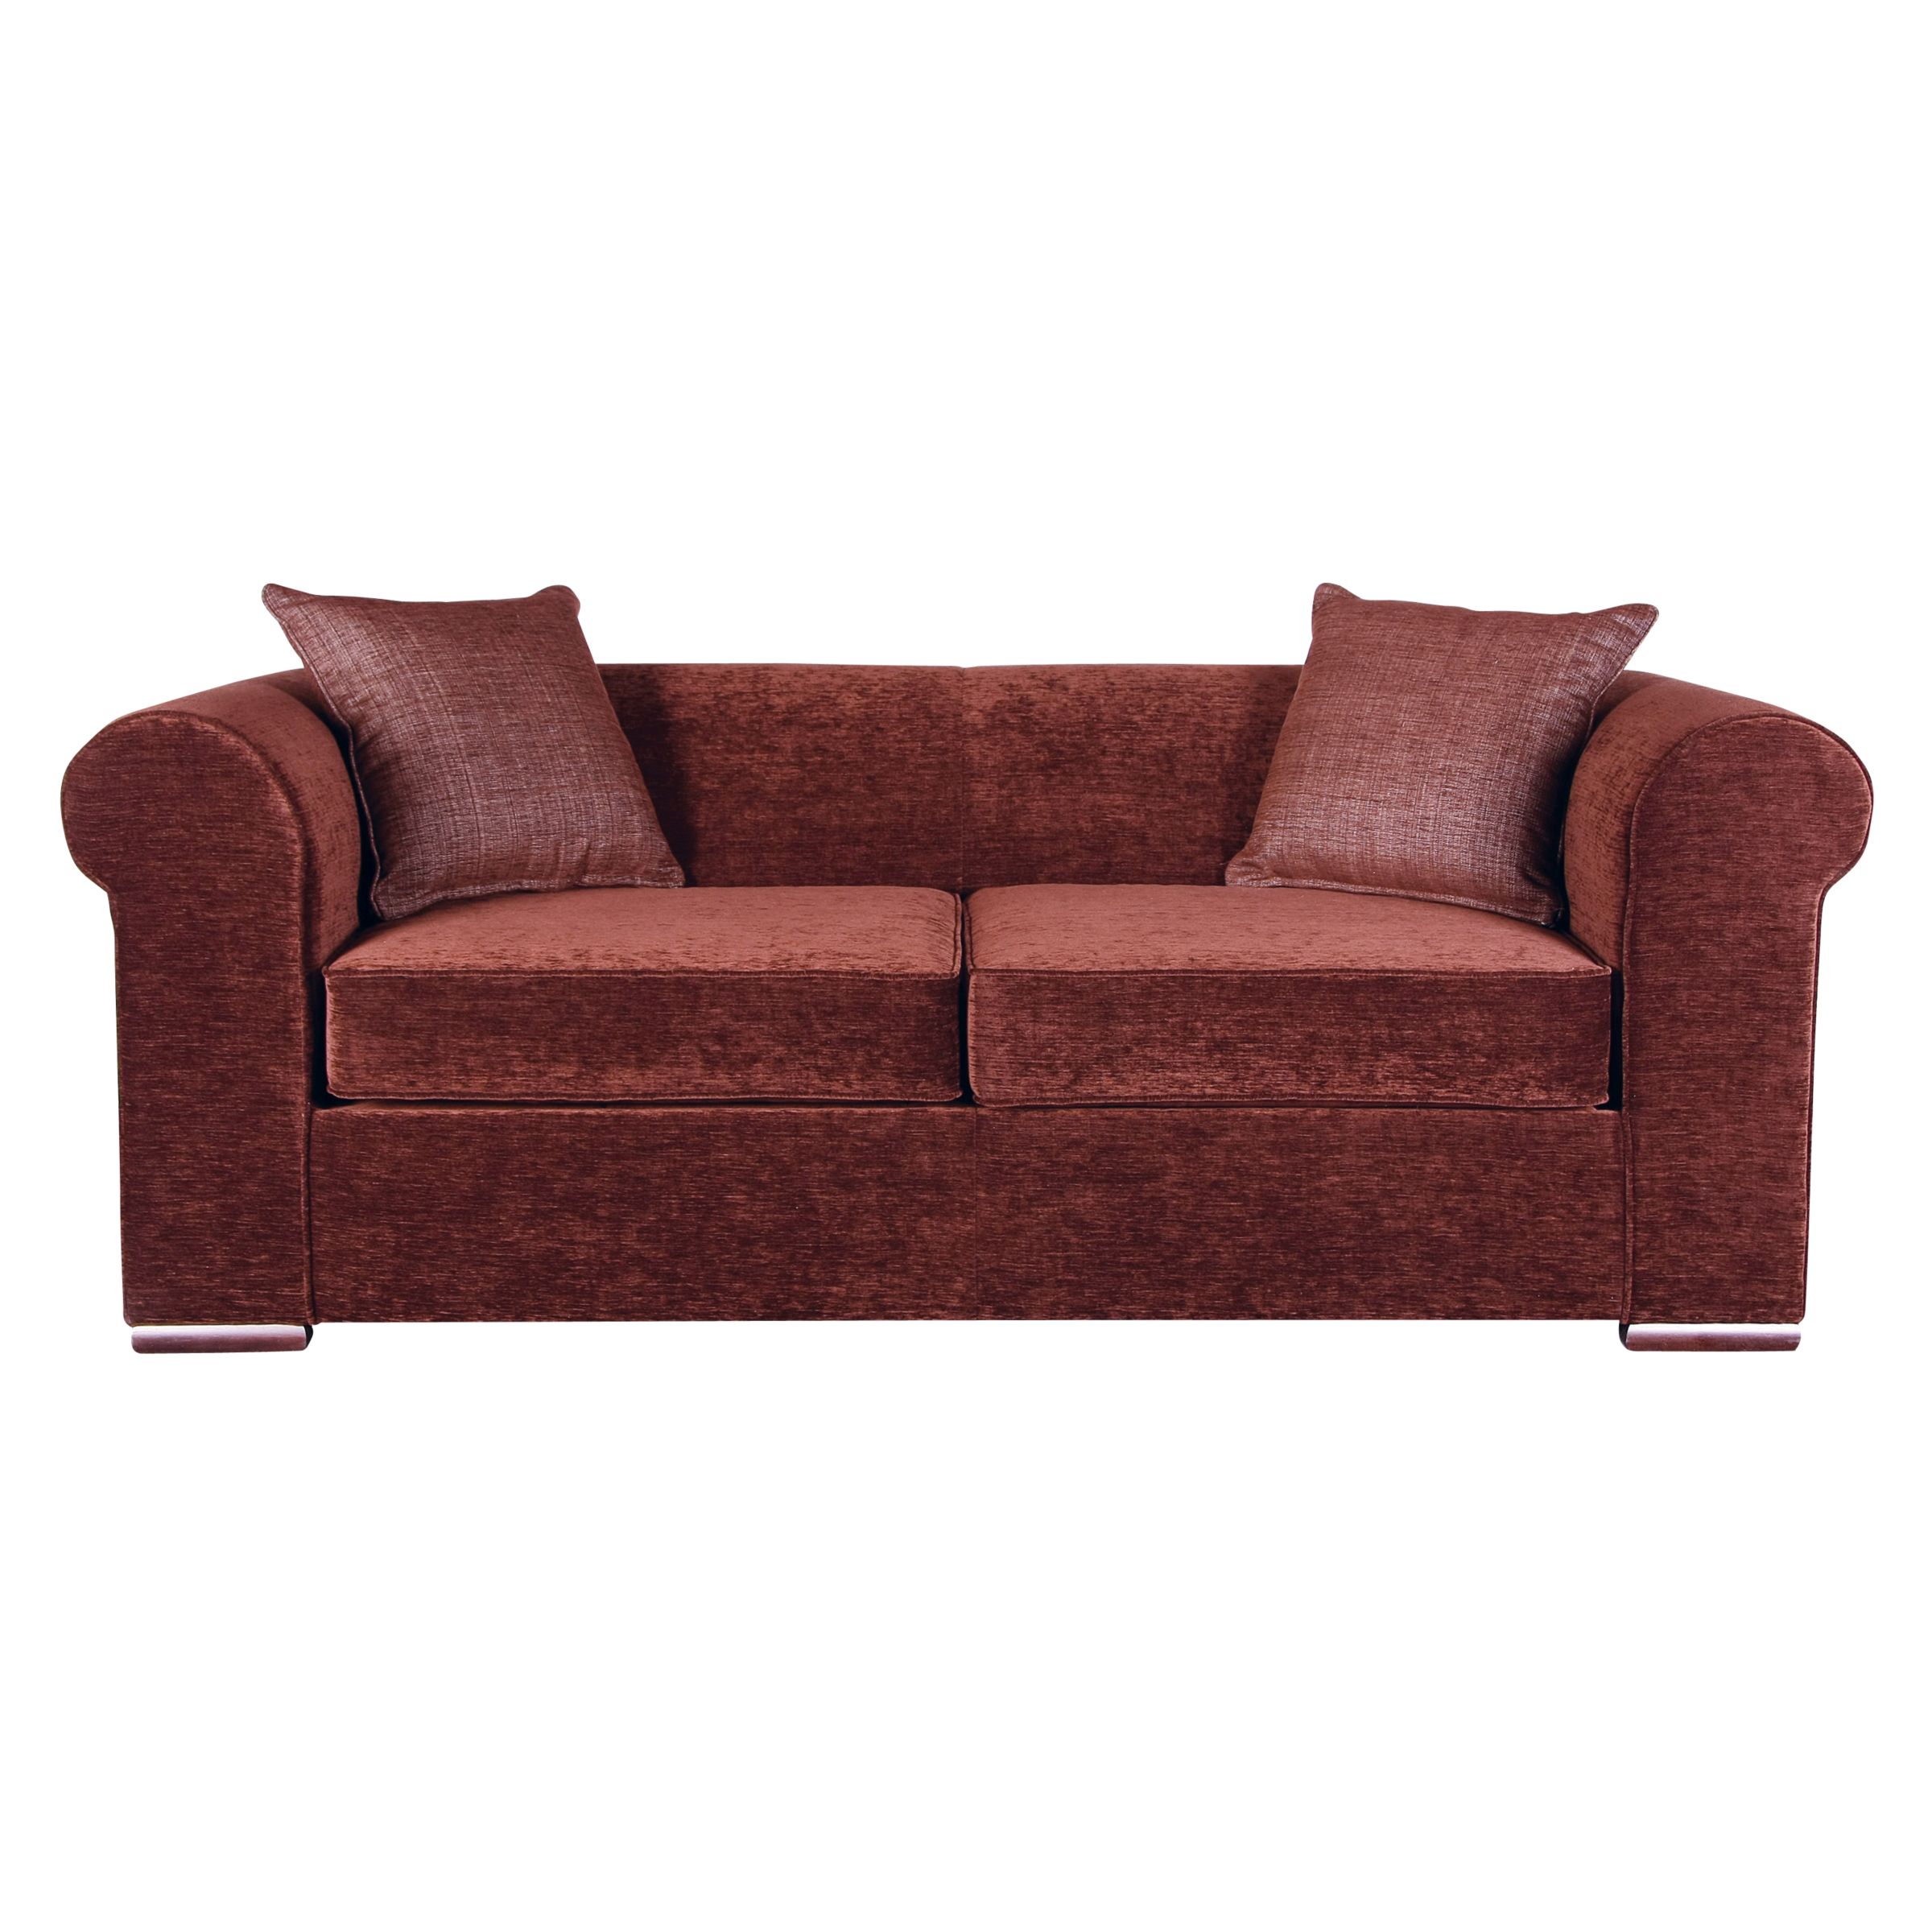 Chilton Large Sofa Bed with Pocket